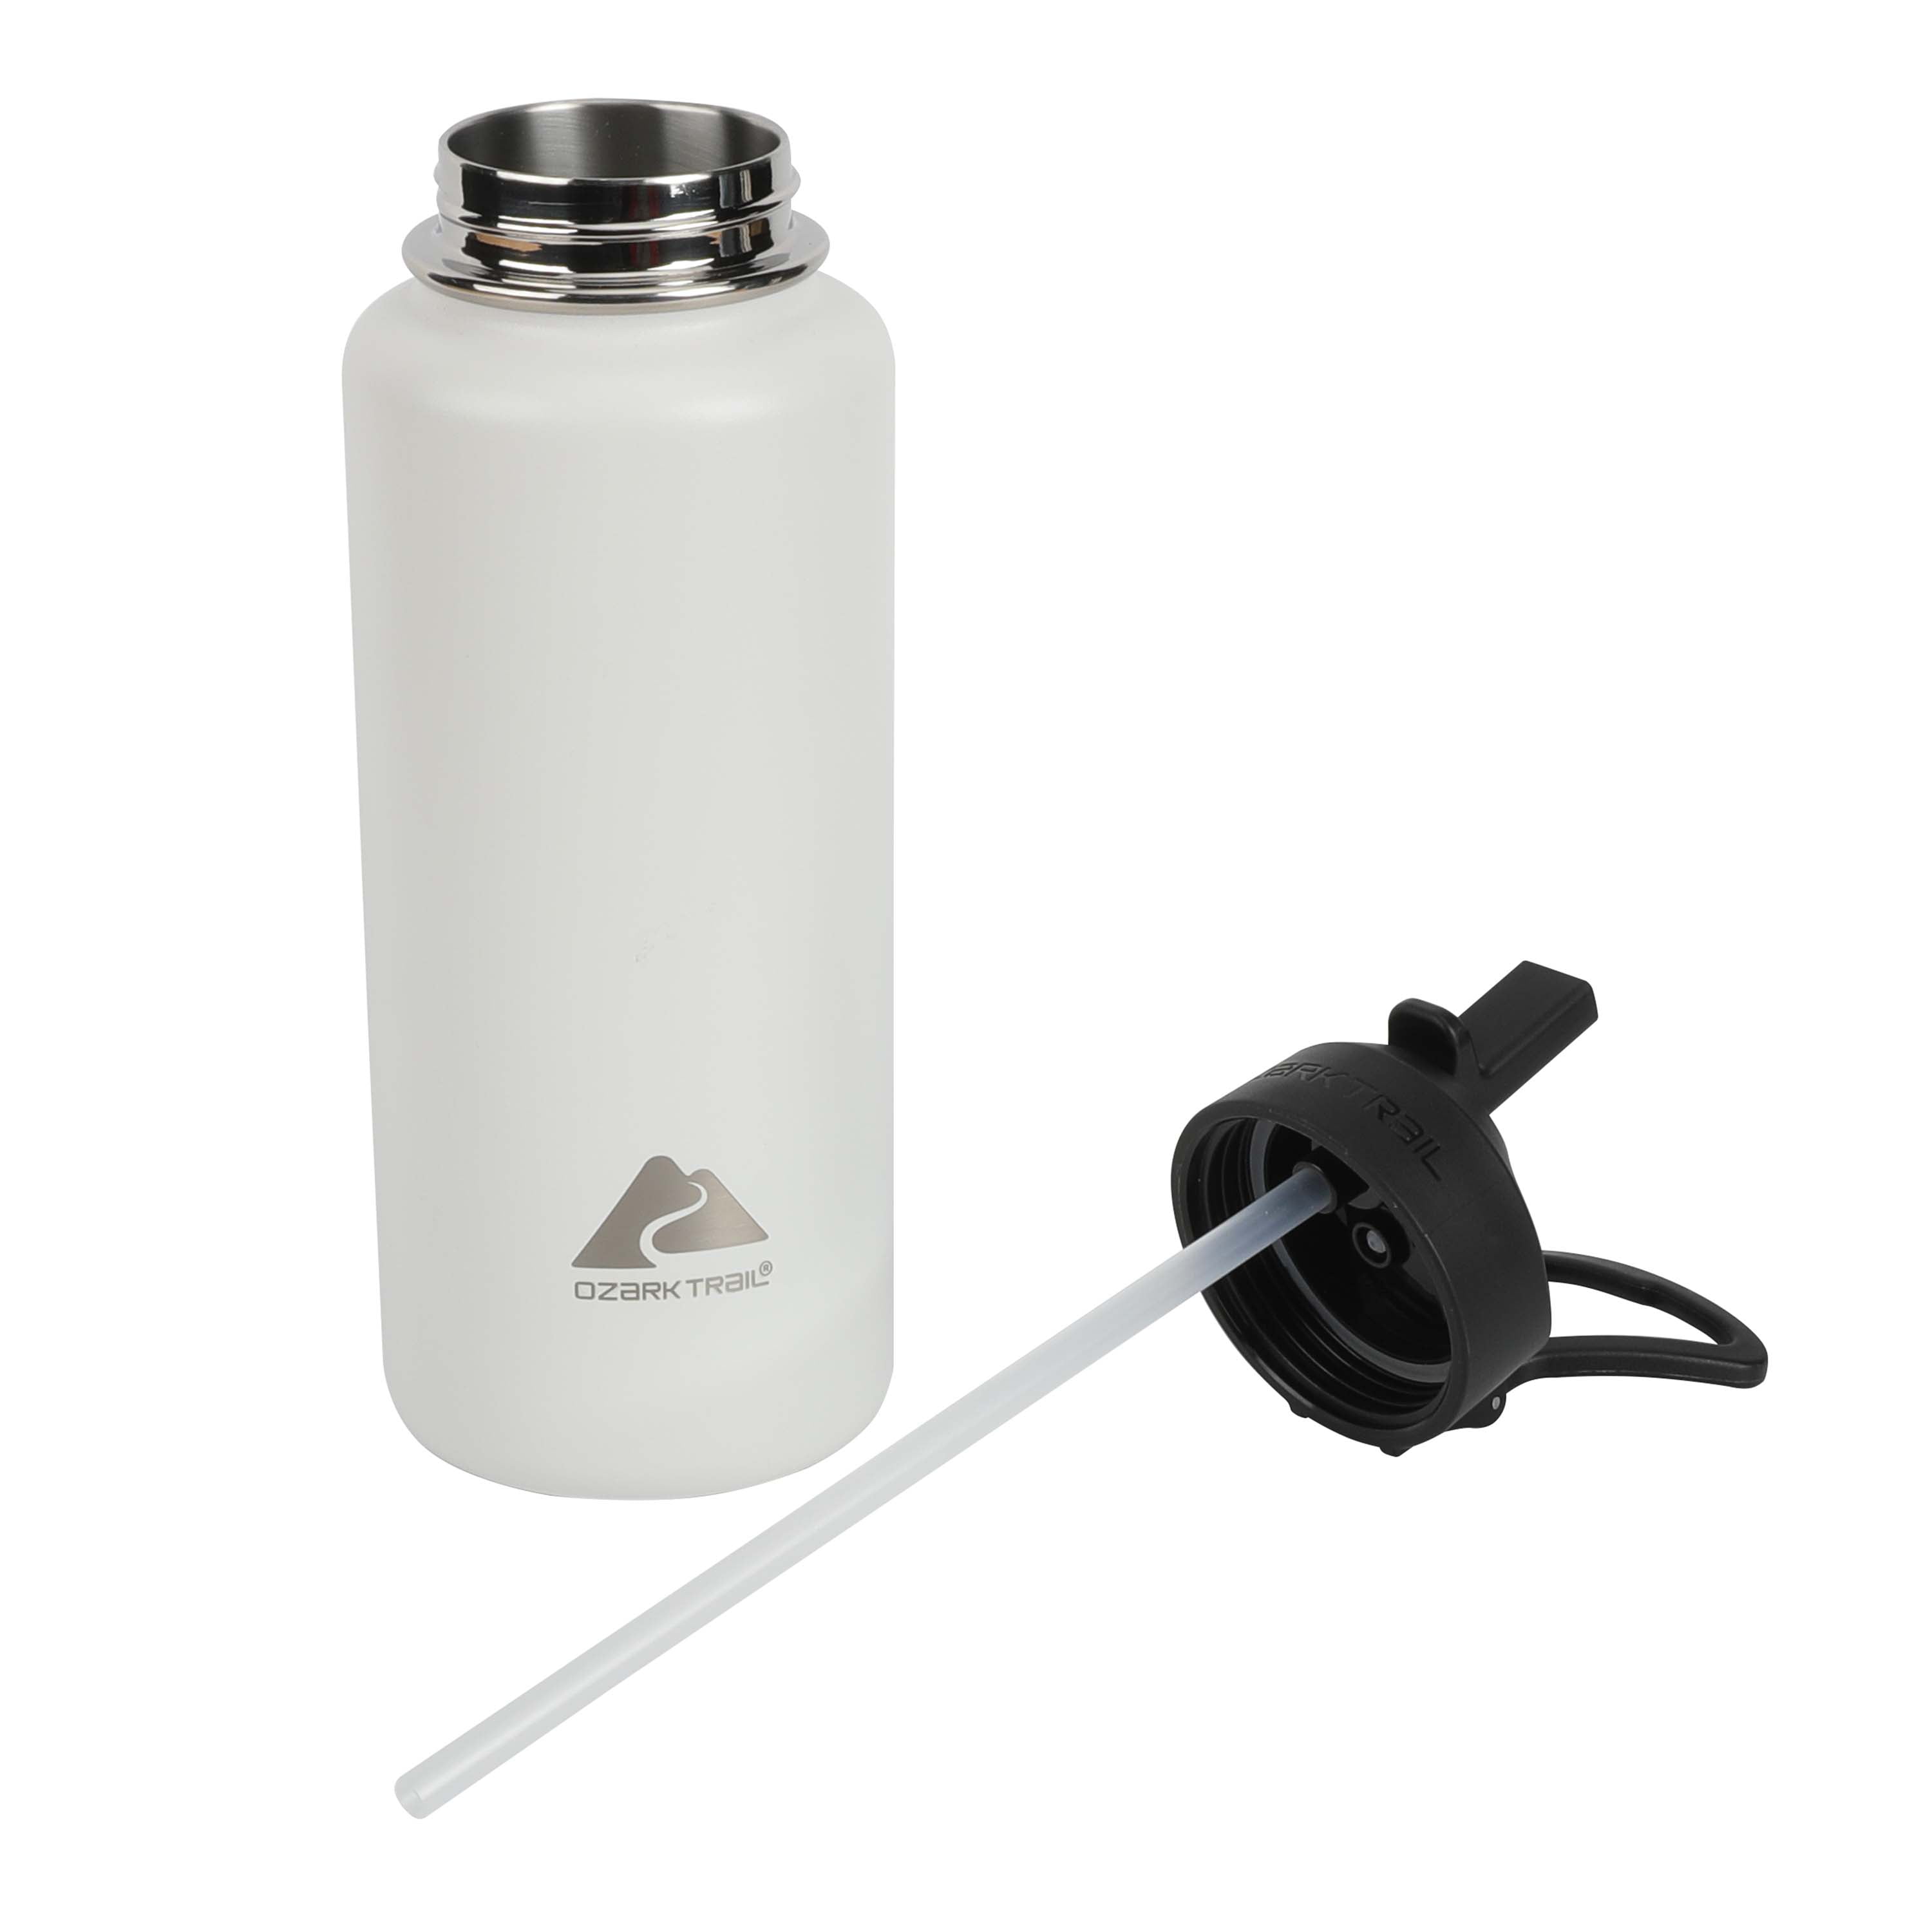 Ozark Trail 32 fl oz White Insulated Stainless Steel Wide Mouth